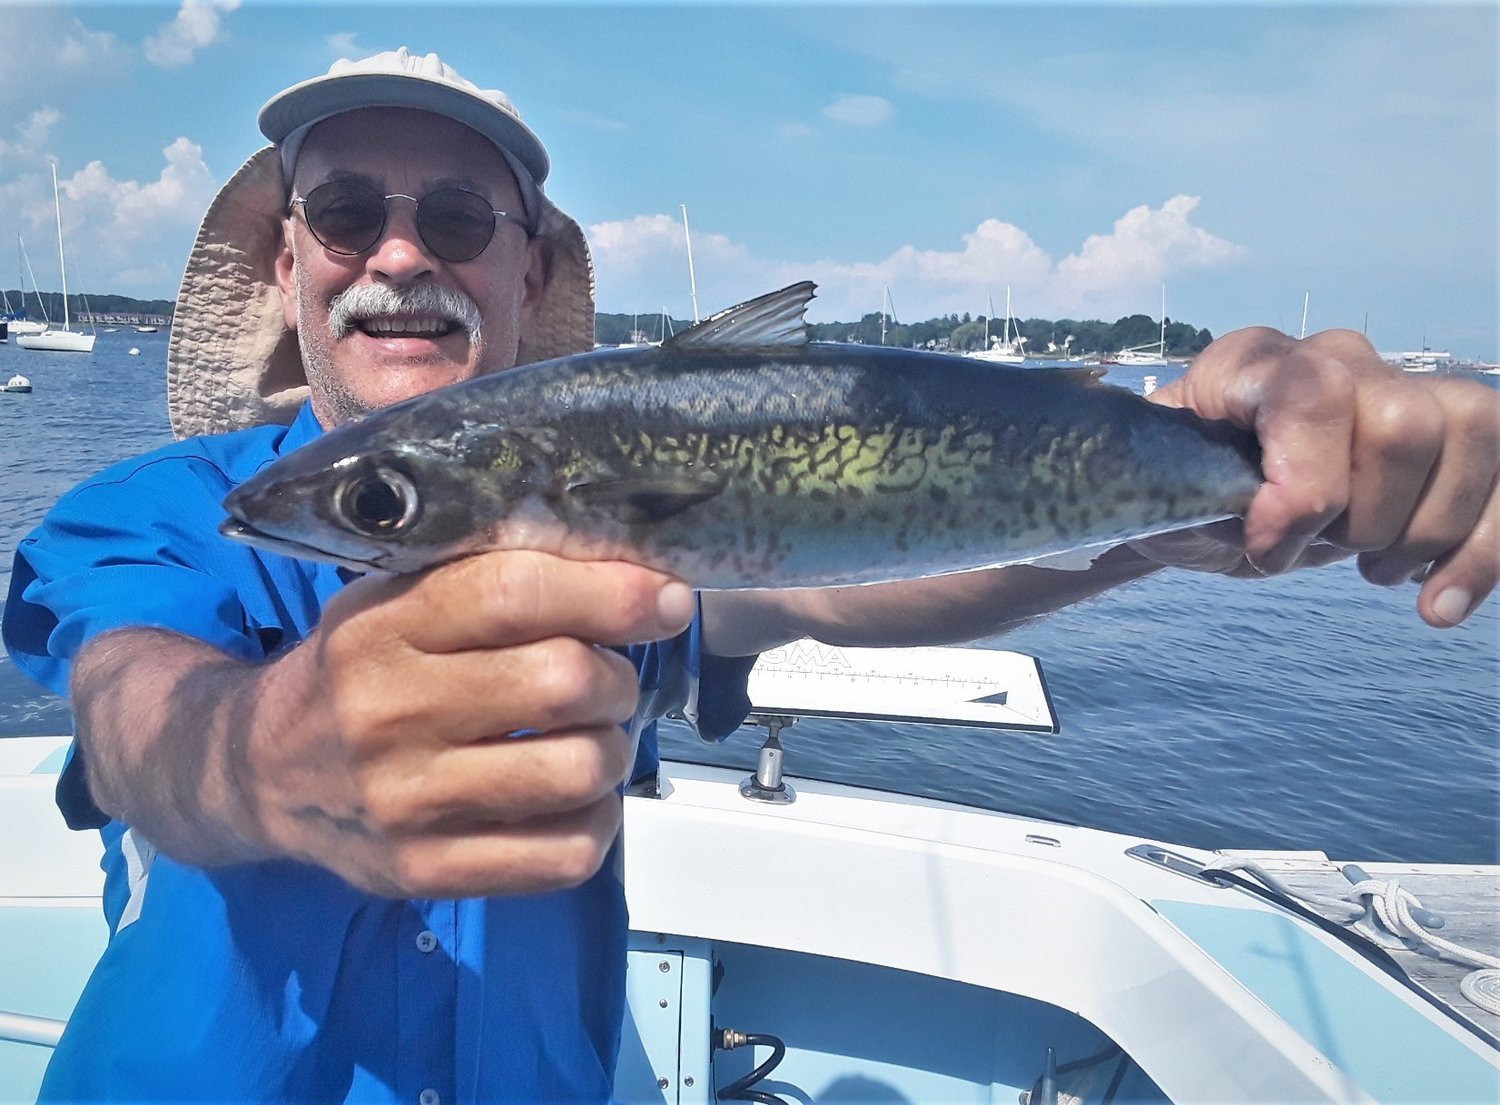 Kevin Fetzer with a chub mackerel he caught off Beavertail Light, Jamestown last year. These speedsters are fun to catch and eat, and this year they are larger, in the 20 inch range.